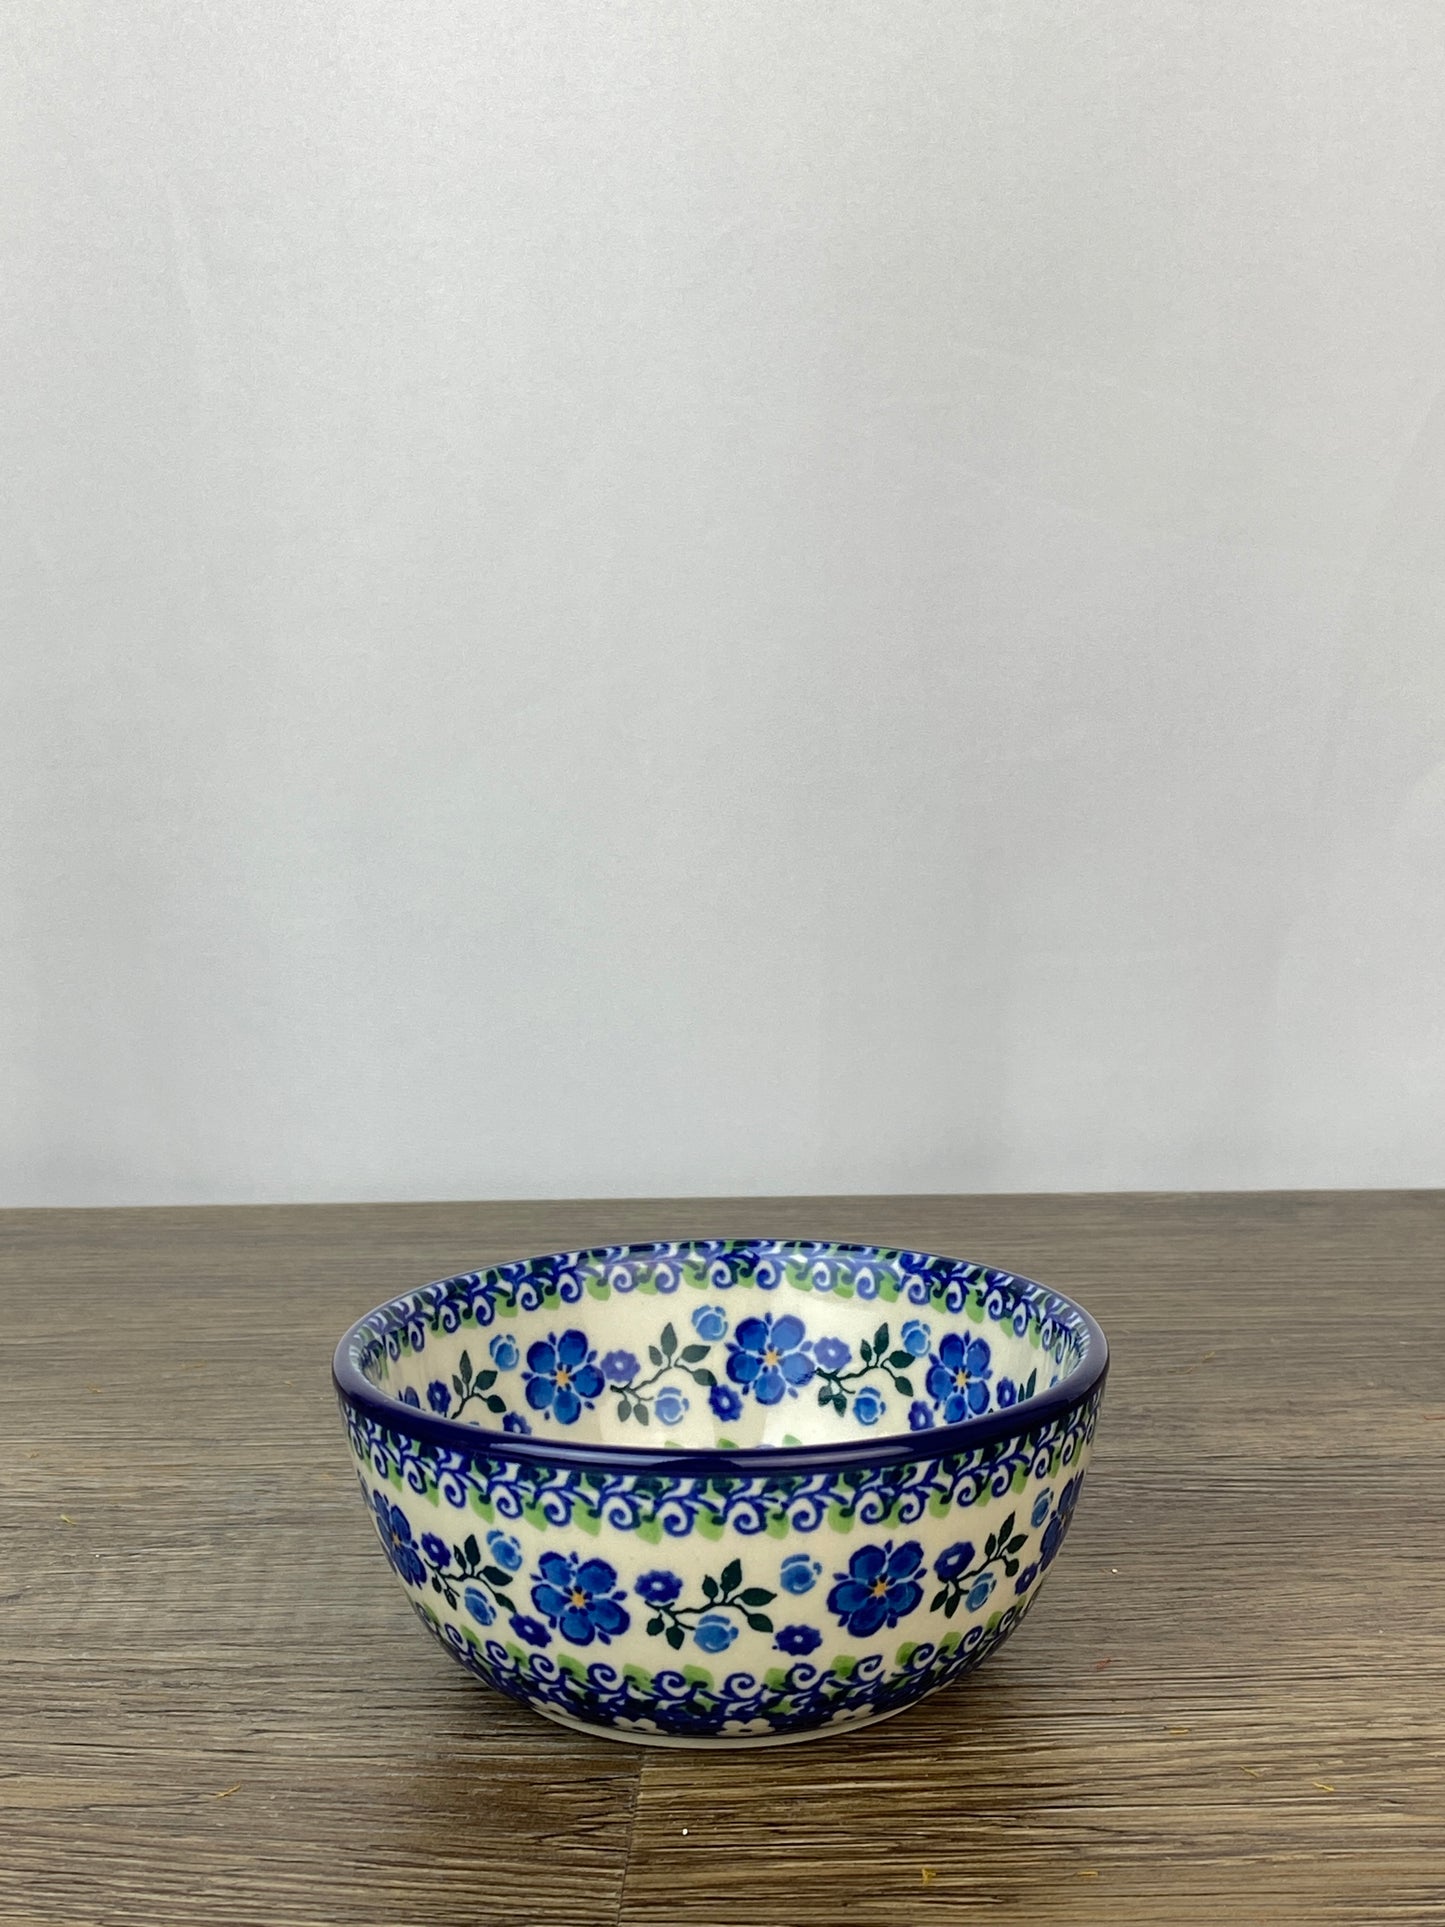 Small Cereal / Dessert Bowl - Shape 17 - Pattern 2251